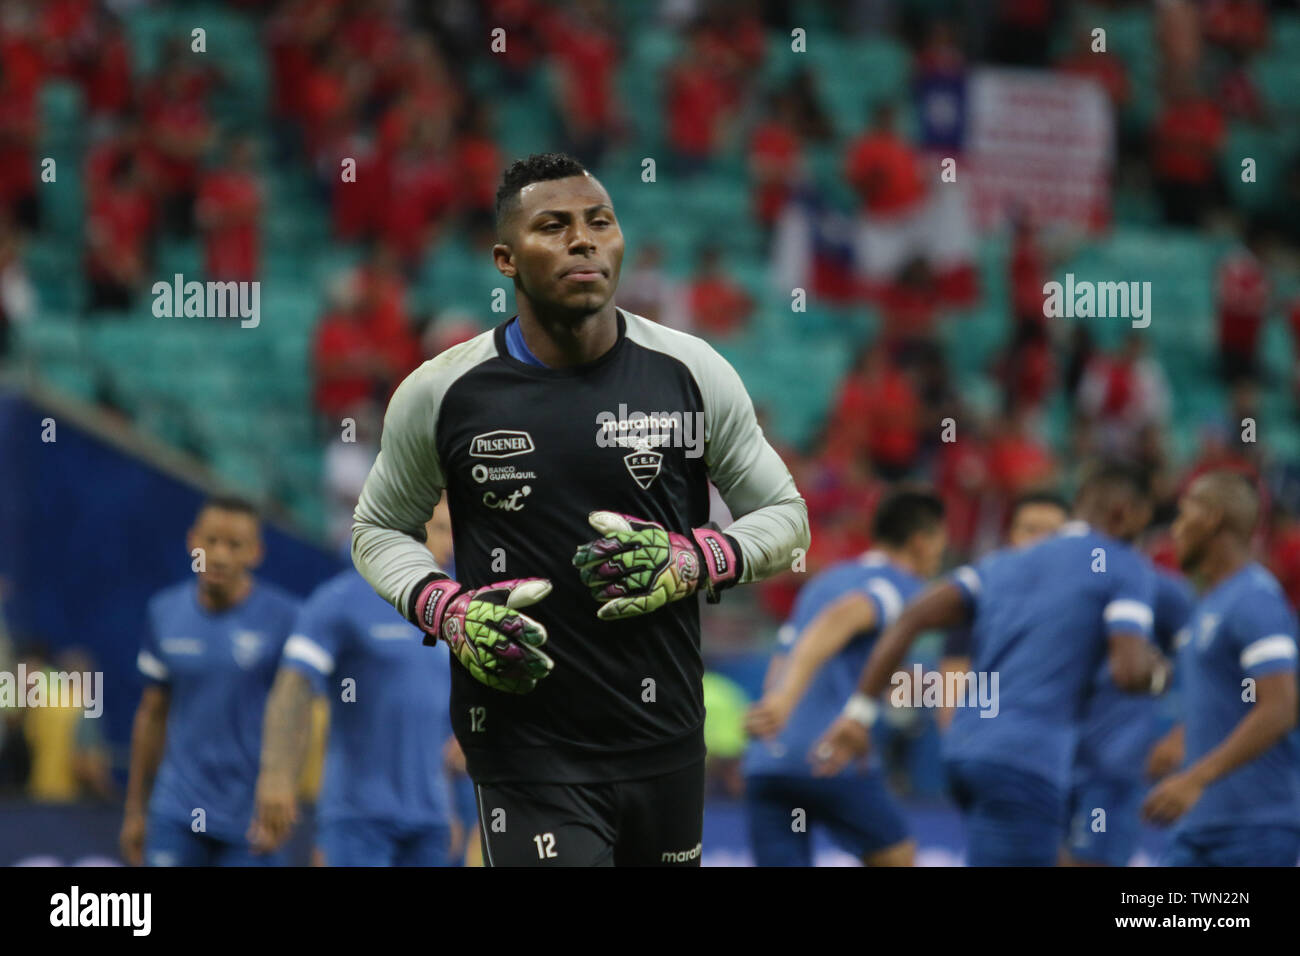 Salvador, Brazil. 21st June, 2019. Ortíz, goalkeeper of the Ecuadorian National Team, during a match between Ecuador and Chile, valid for the 2019 Copa America group stage, held this Friday (21) at the Fonte Nova Arena in Salvador, Bahia, Brazil. Credit: Tiago Caldas/FotoArena/Alamy Live News Stock Photo